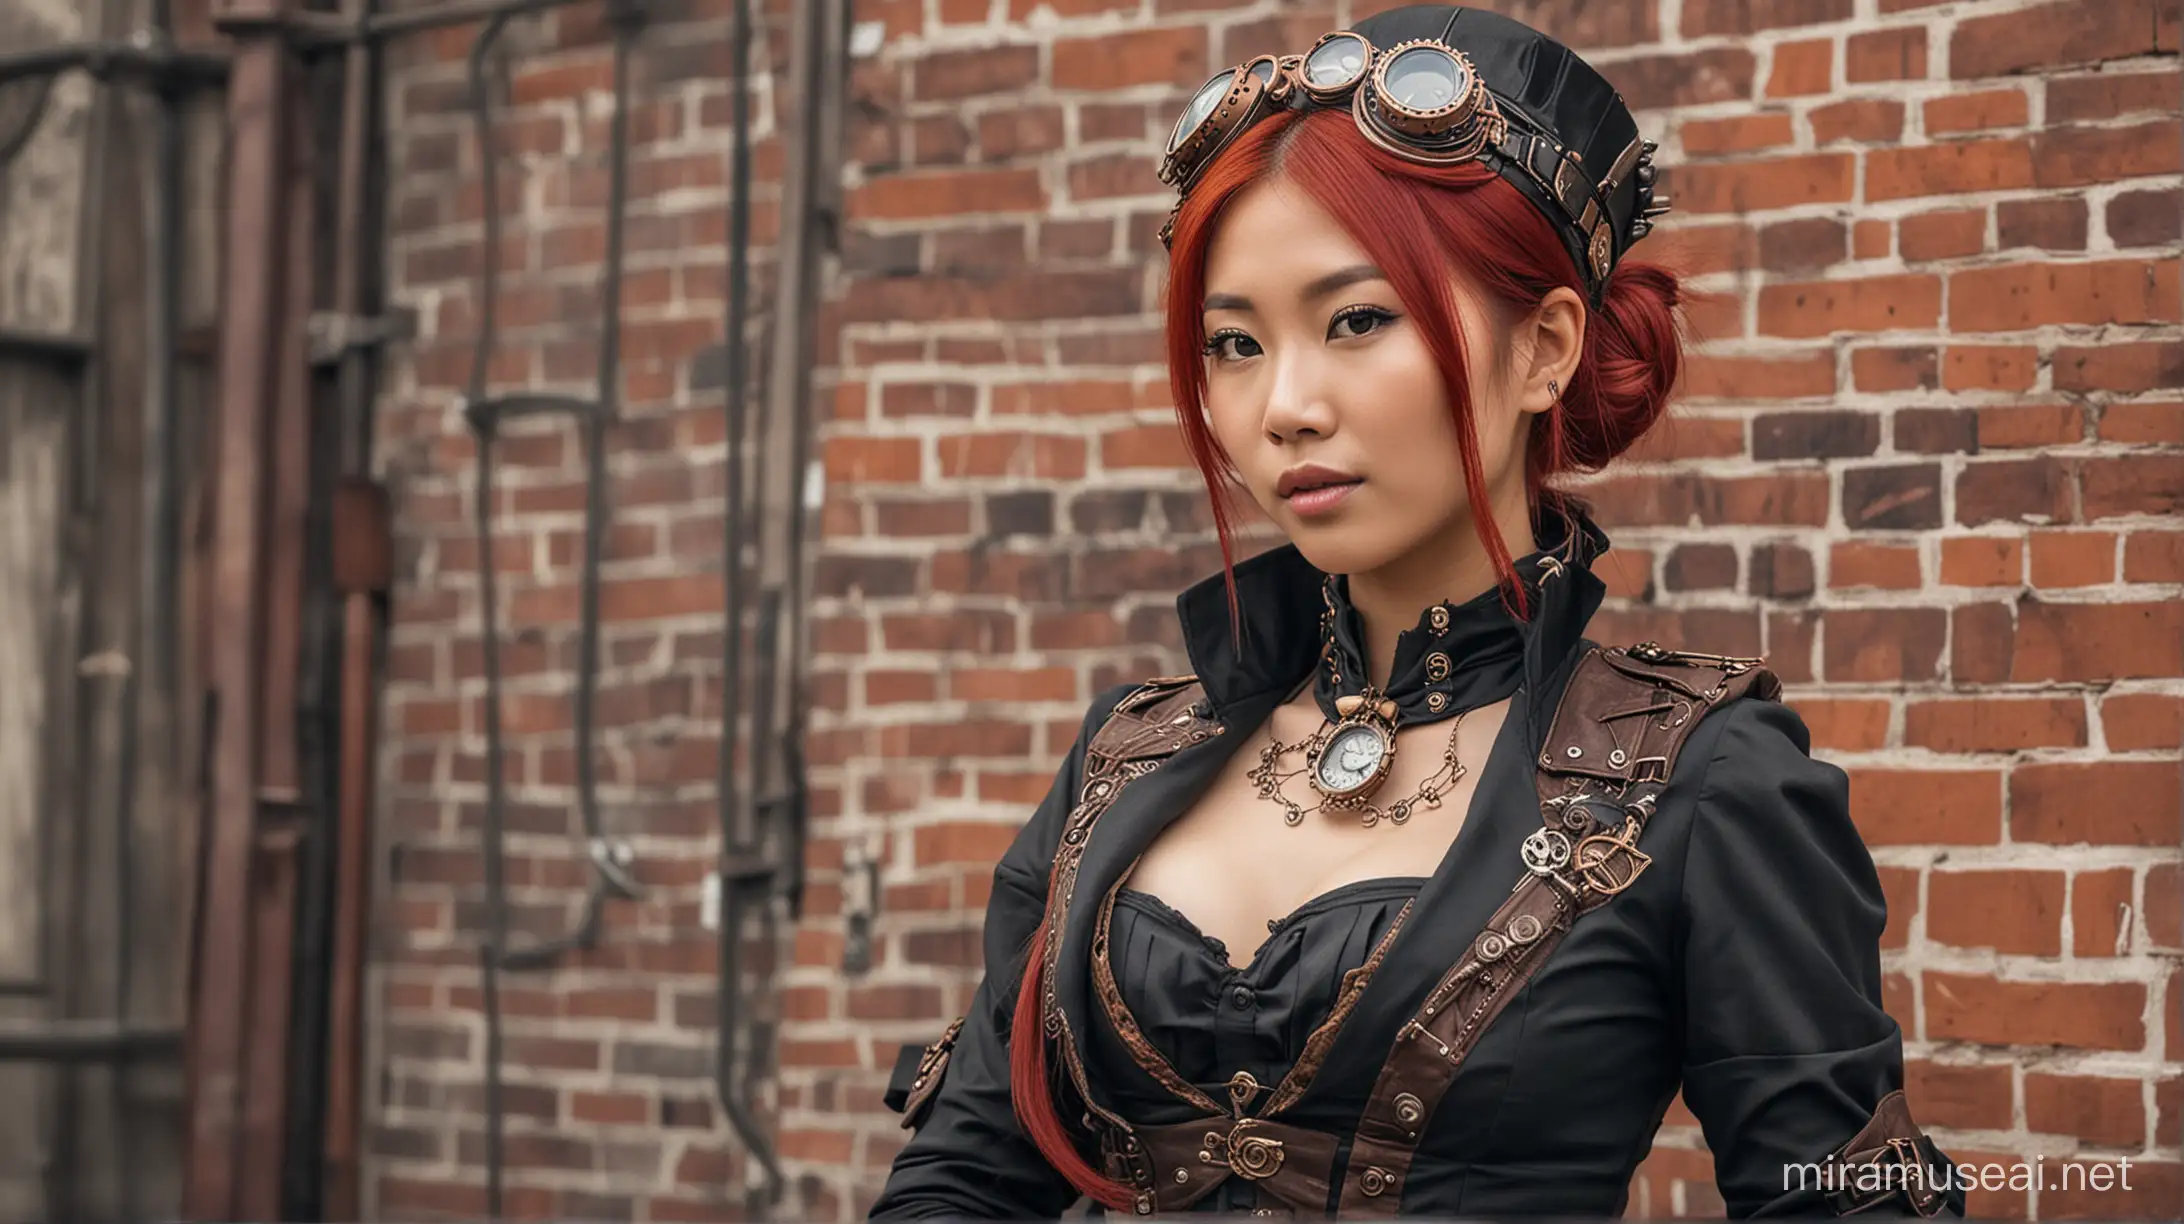 Asian Woman with Red Hair in Steampunk Attire